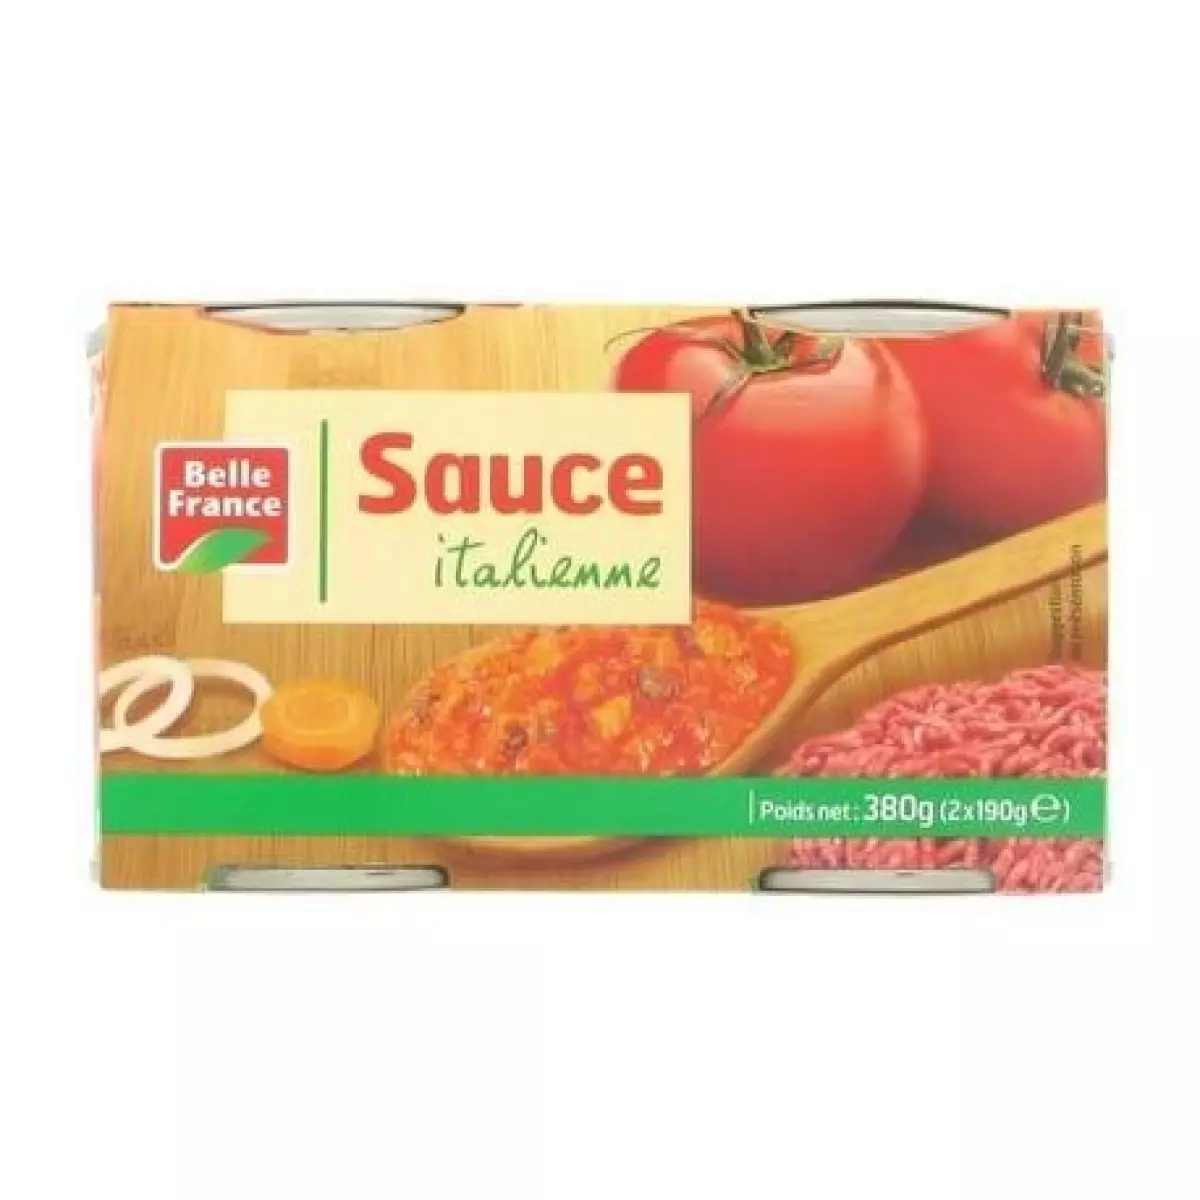 SAUCE TOMATE A L'ITALIENNE BTE 1/4 X 2 BELLE FRANCE